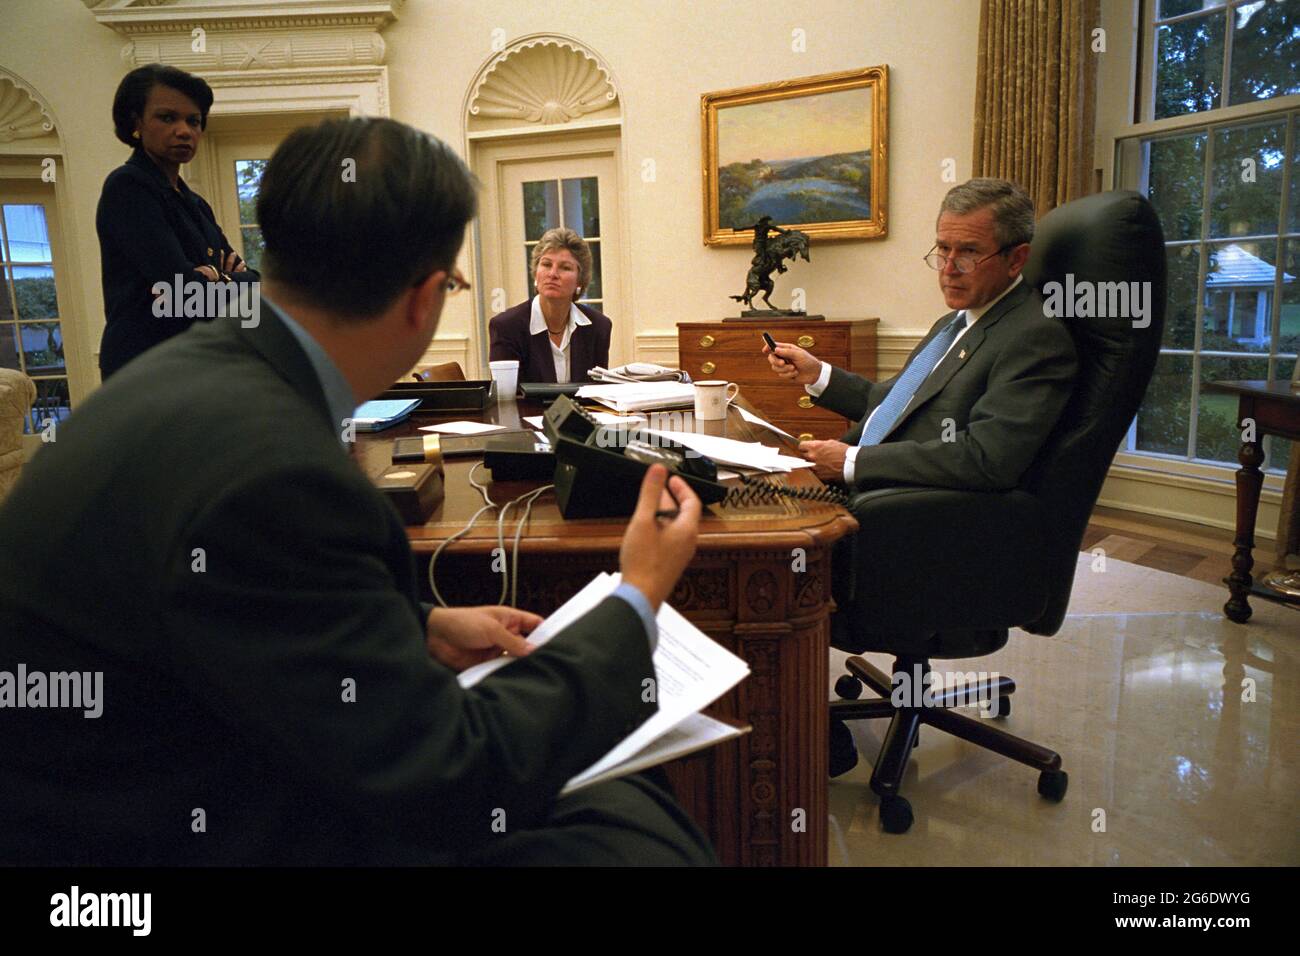 President George W. Bush prepares for his Address to the Nation with National Security Adviser Condoleezza Rice, speechwriter Mike Gerson, and Presidential Counselor Karen Hughes Thursday, Sept. 20, 2001, in the Oval Office.  Photo by Eric Draper, Courtesy of the George W. Bush Presidential Library Stock Photo